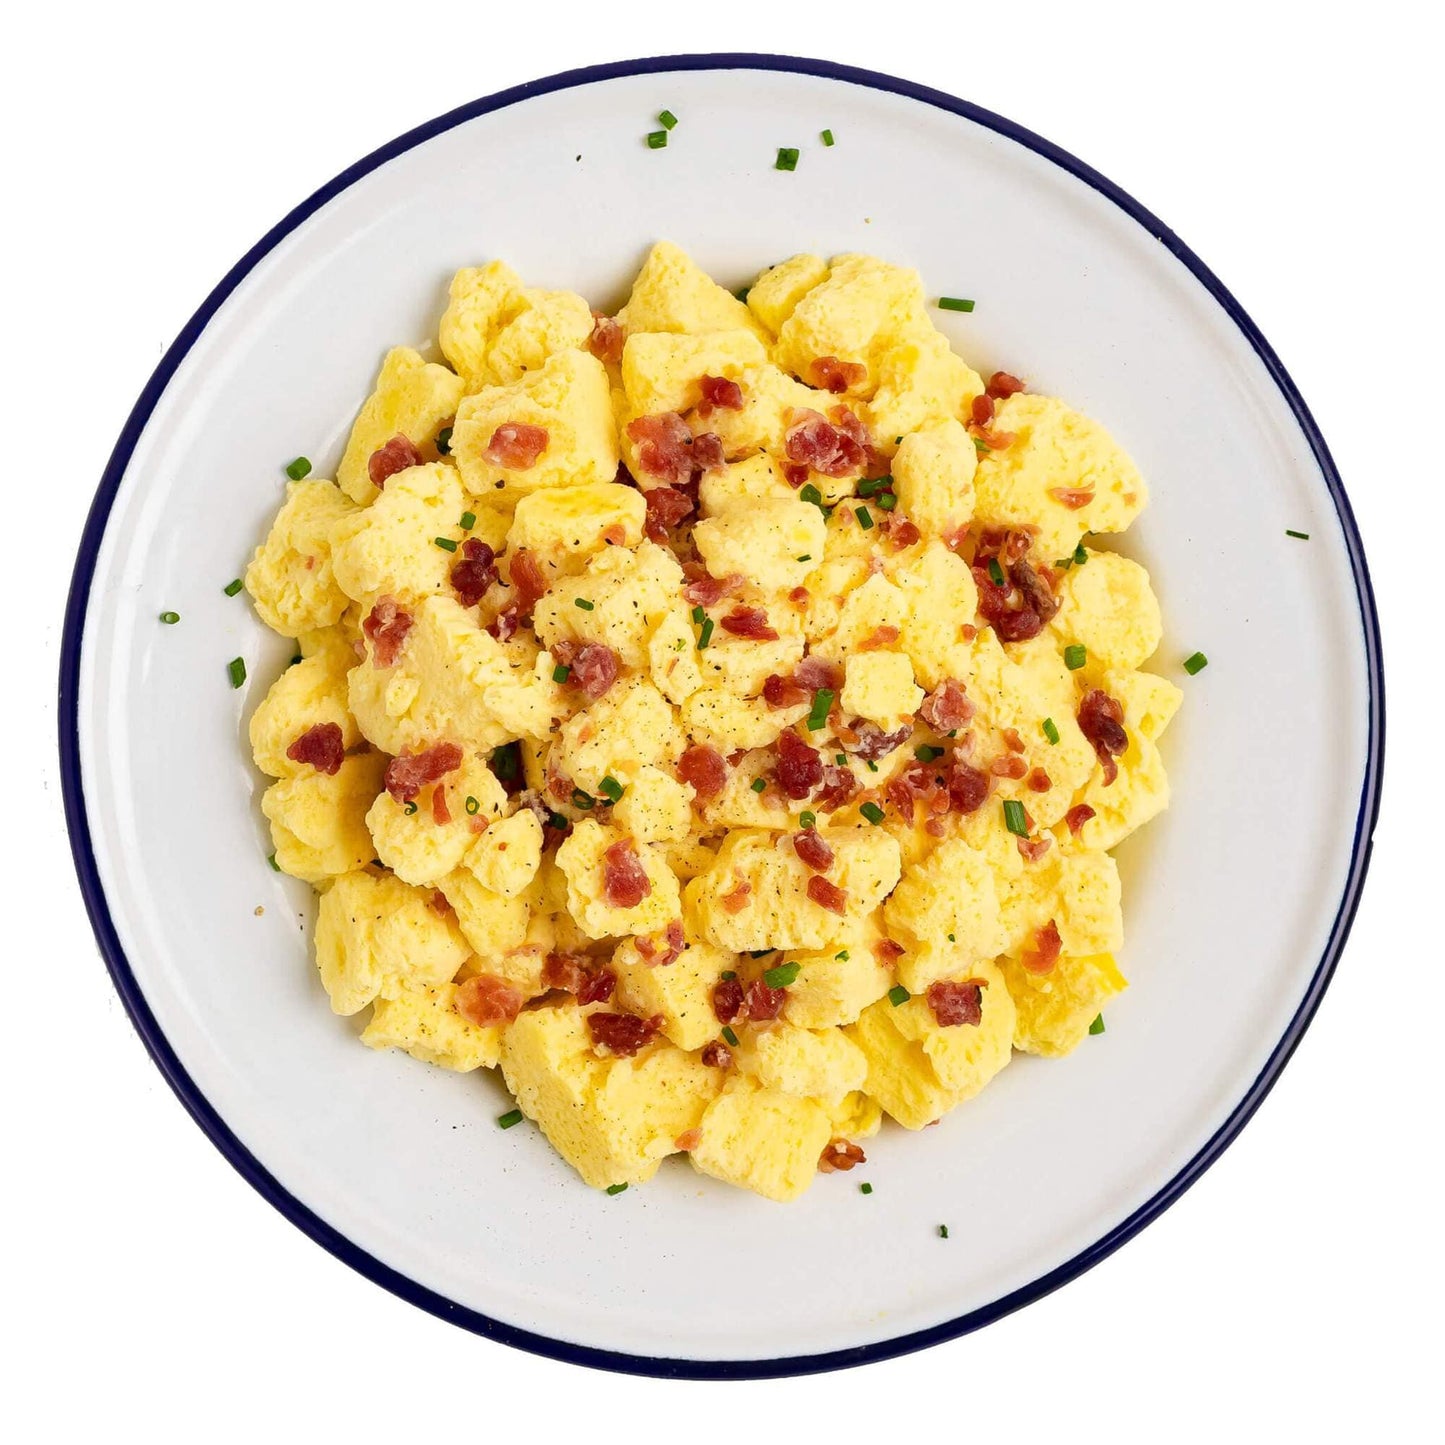 Scrambled Eggs with Bacon - Pouch (6/case)